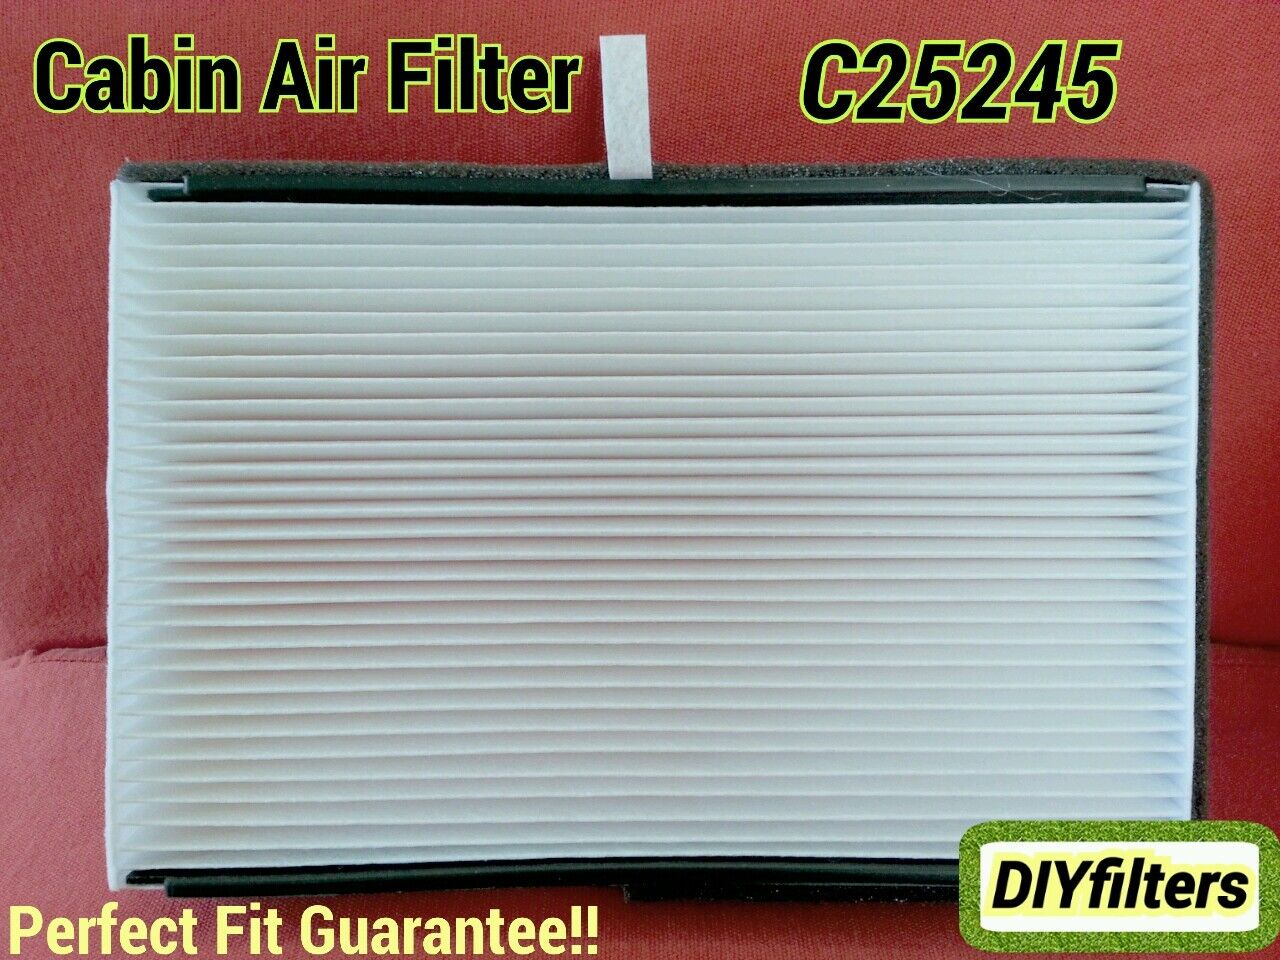 CABIN AIR FILTER For Buick 97-04 Regal Chevy 97-08 Monte Carlo Fast Ship